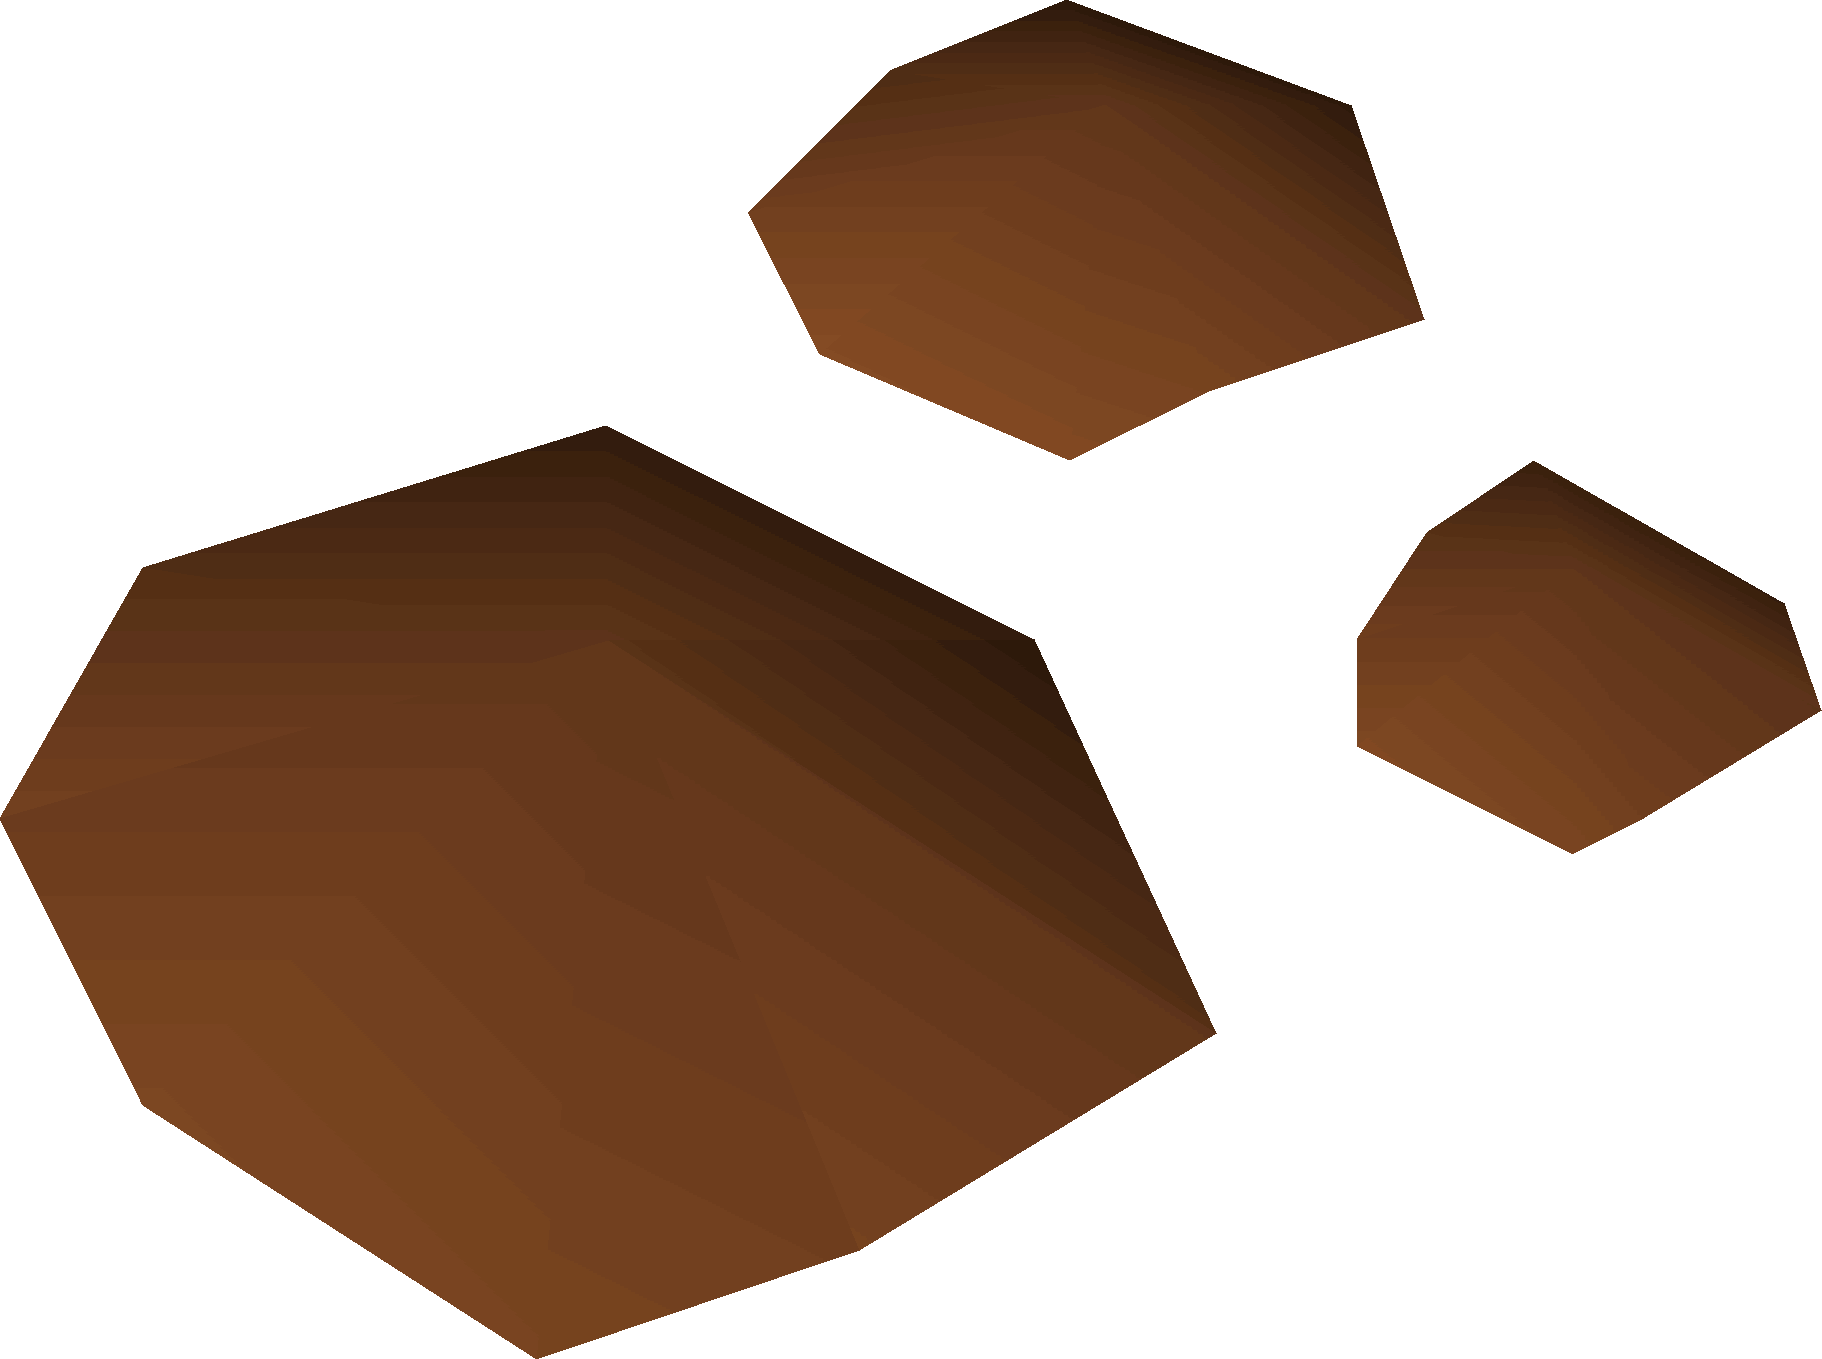 Chocolate old school runescape. Dust clipart dust trail